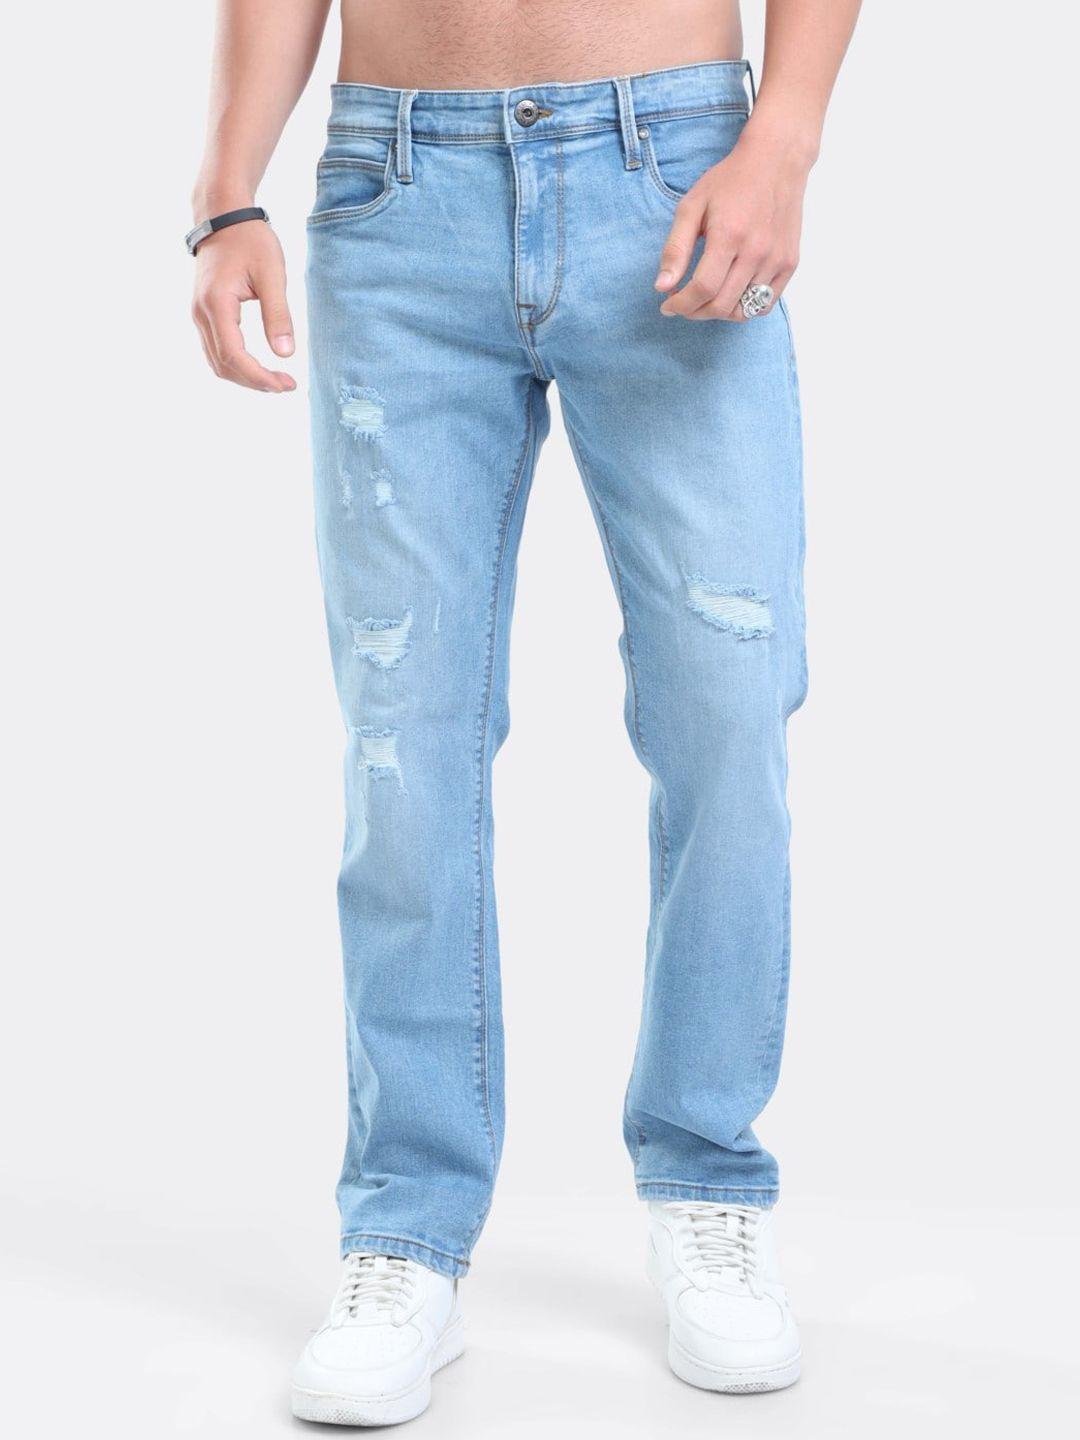 badmaash men blue jean relaxed fit highly distressed light fade stretchable jeans